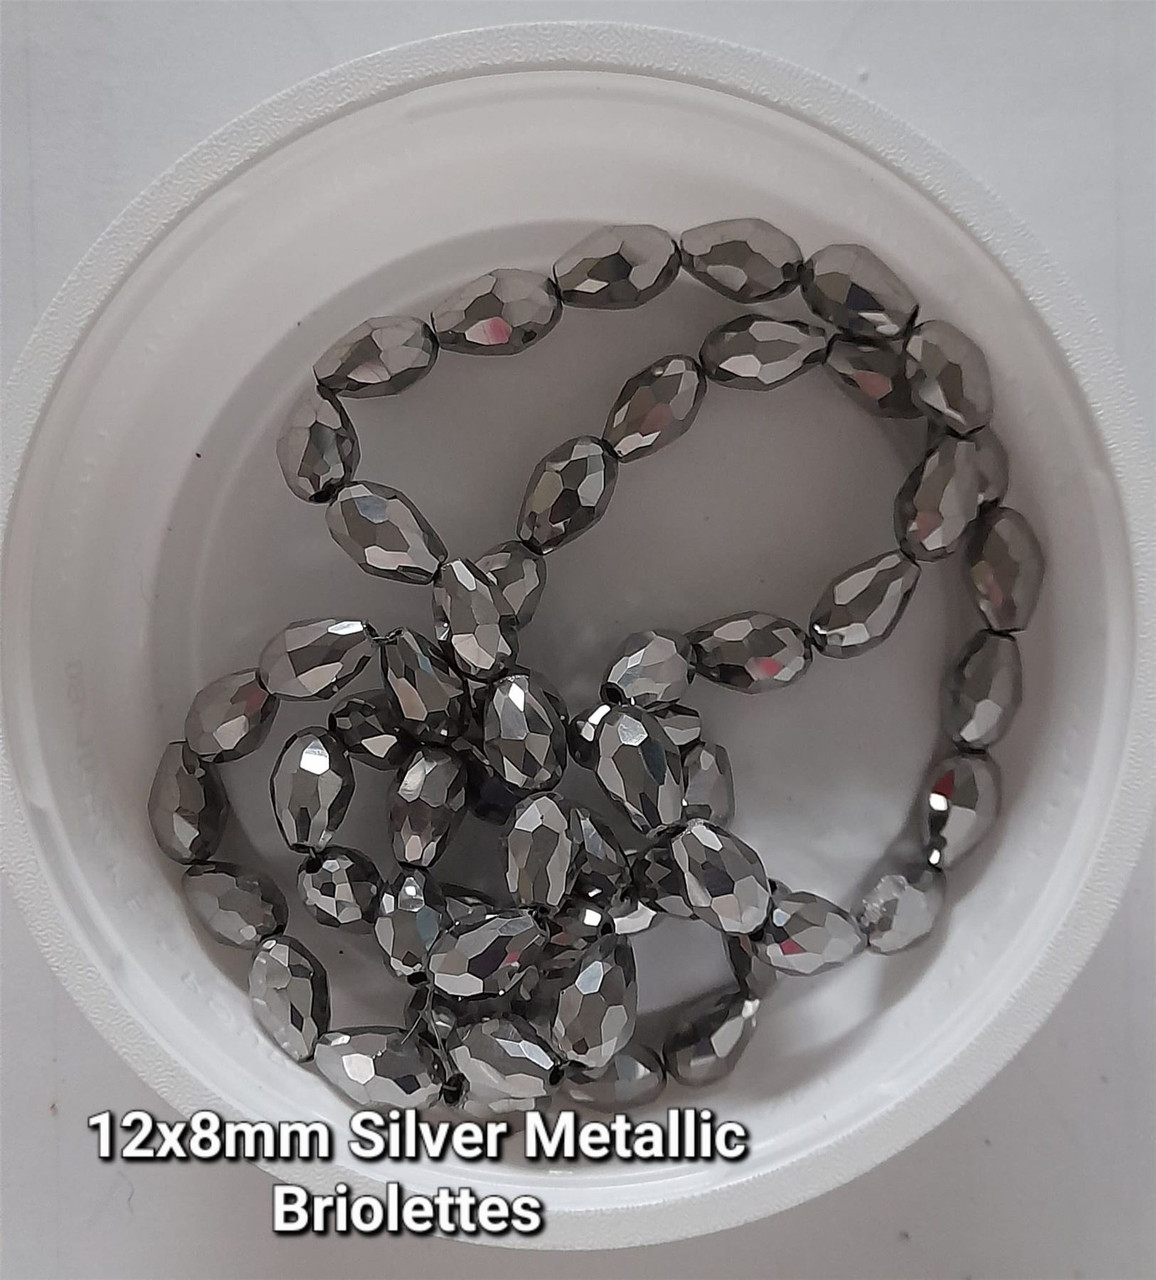 Strand of faceted drop glass beads (briolettes) - approx 12x8mm, Silver Metallic, approx 60 beads